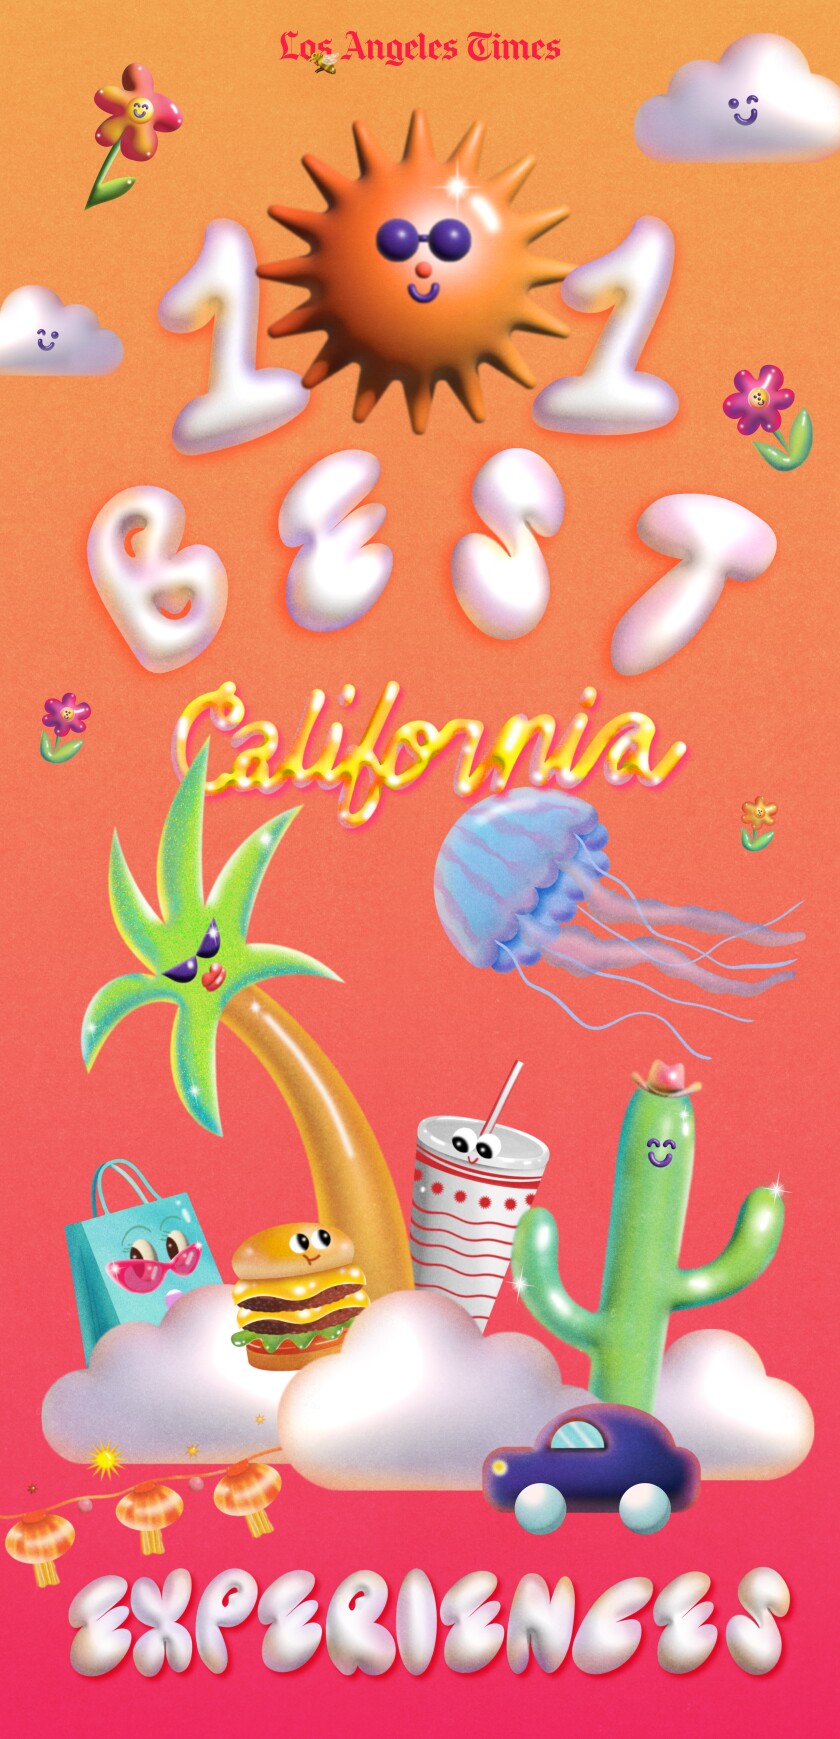 An illustration includes a burger and soda, cactus and palm tree, and the words "101 Best California Experiences."